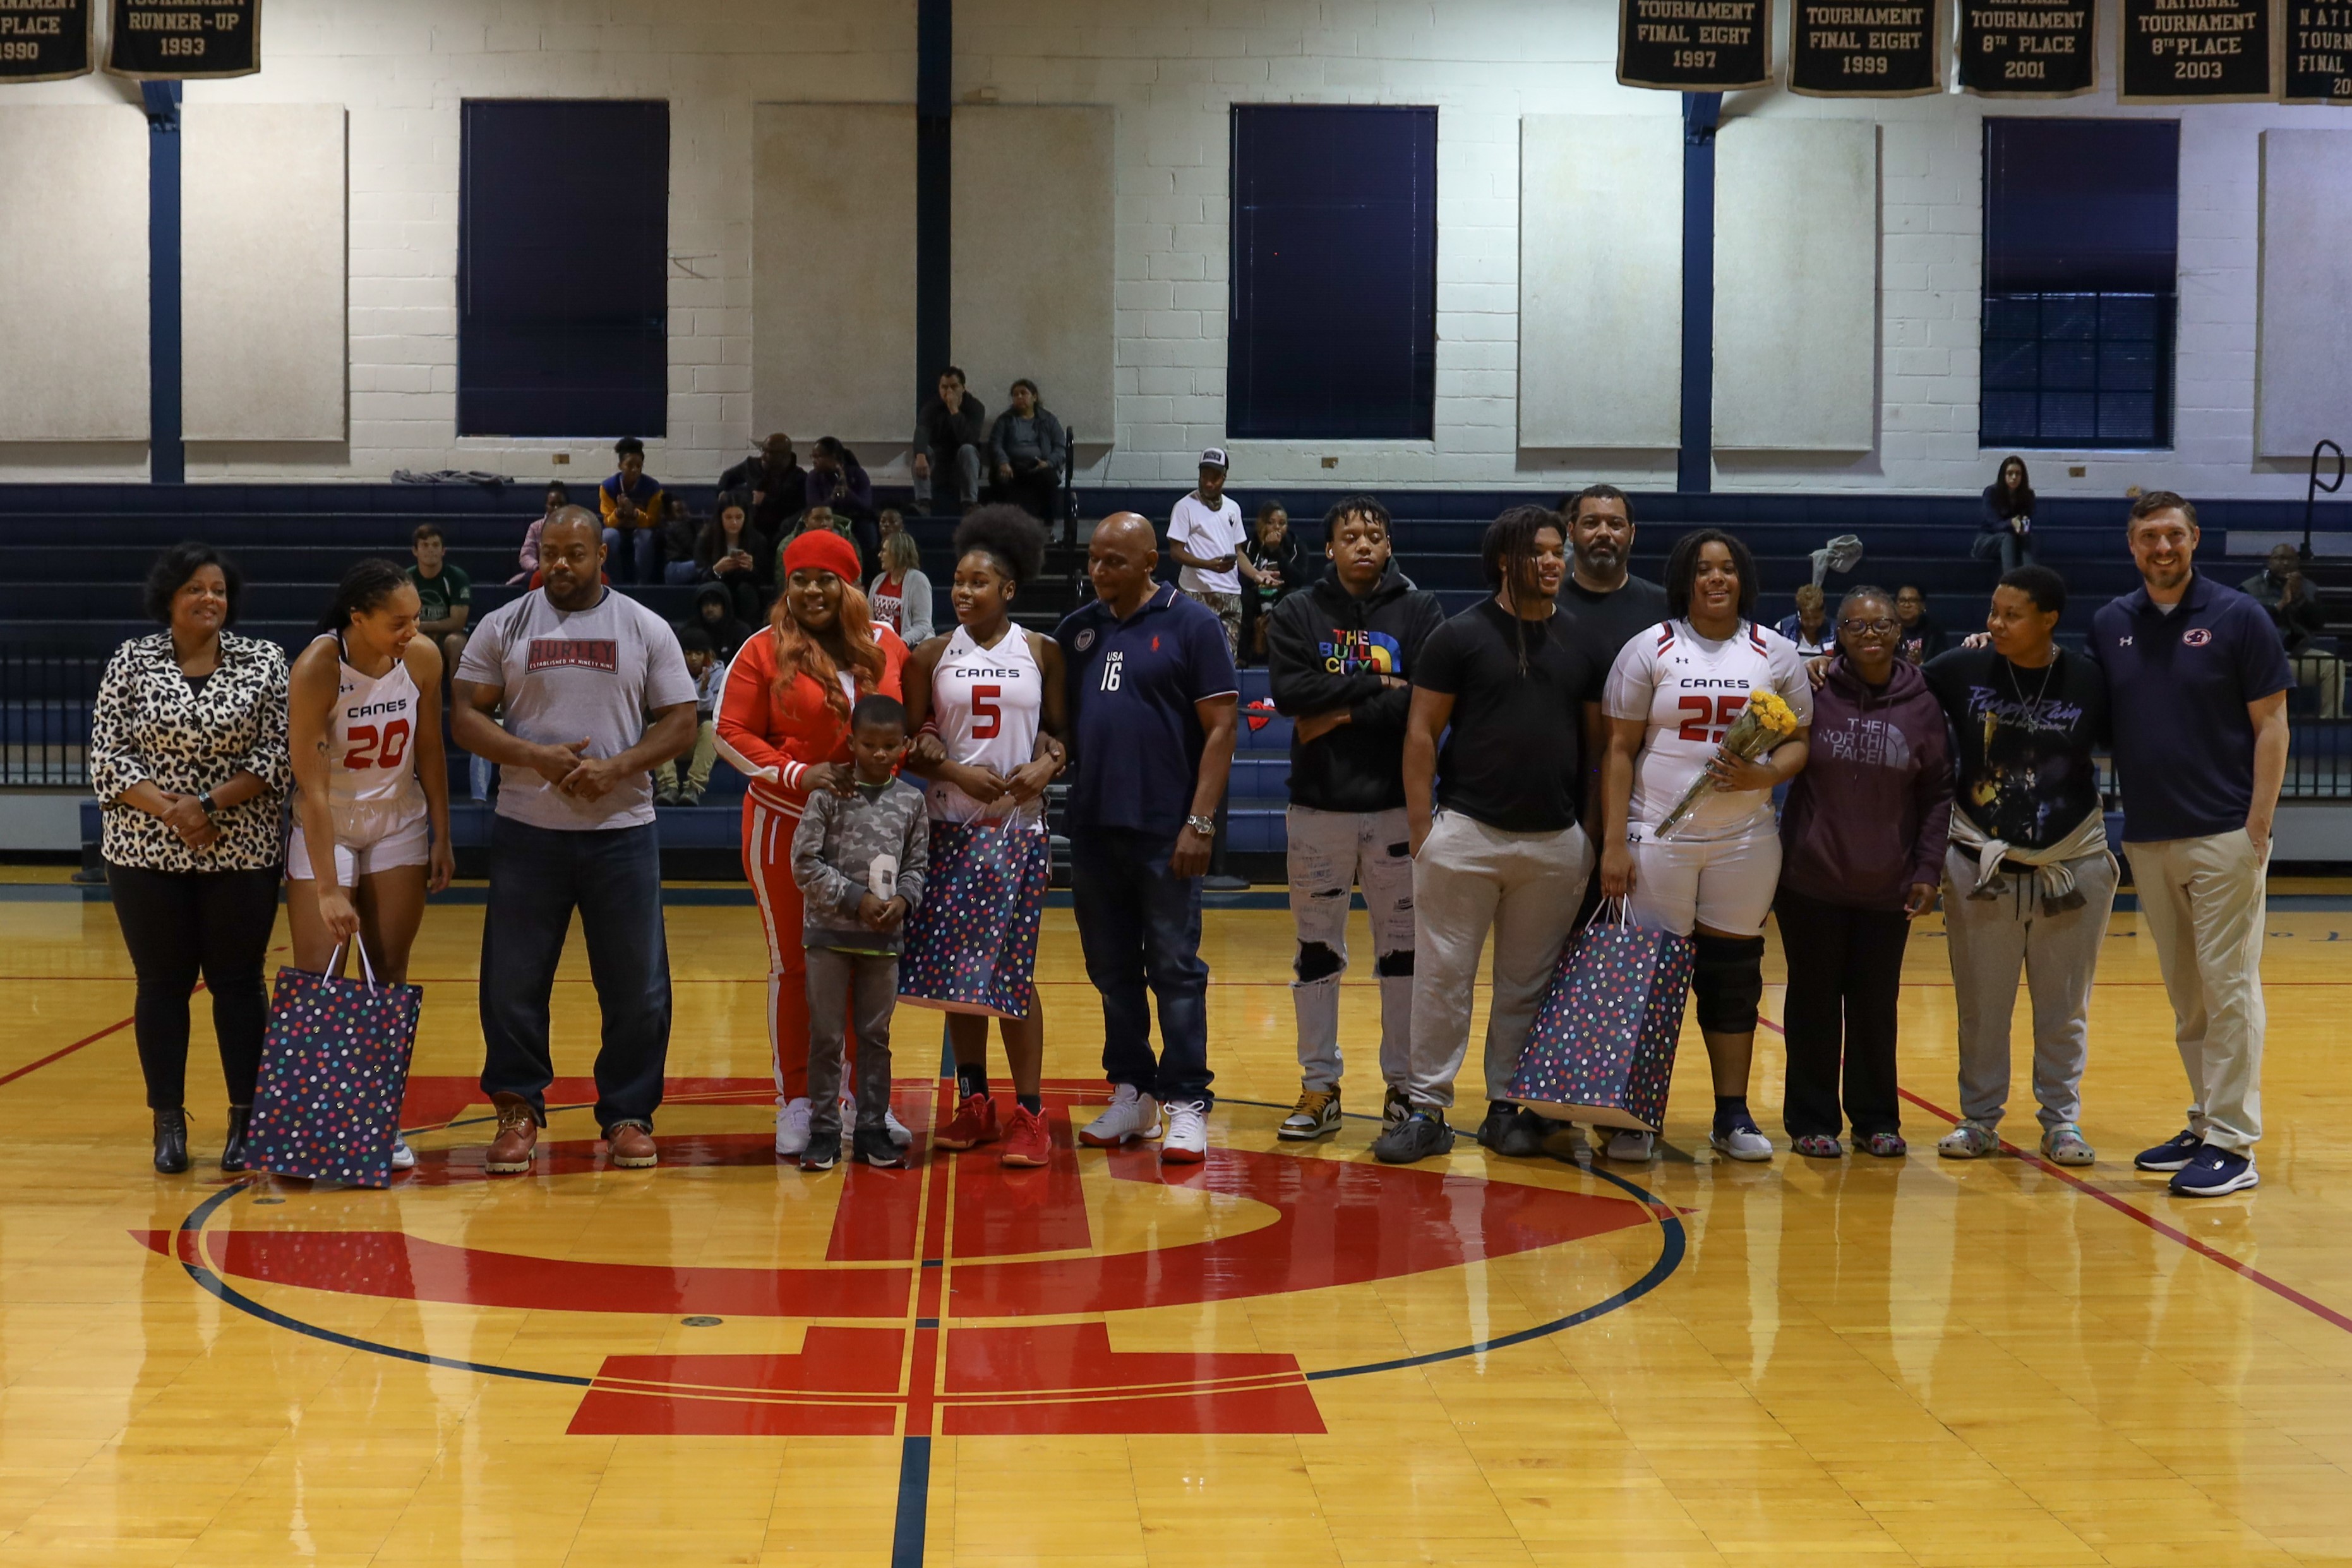 Women's Basketball sophomores with friends and family.